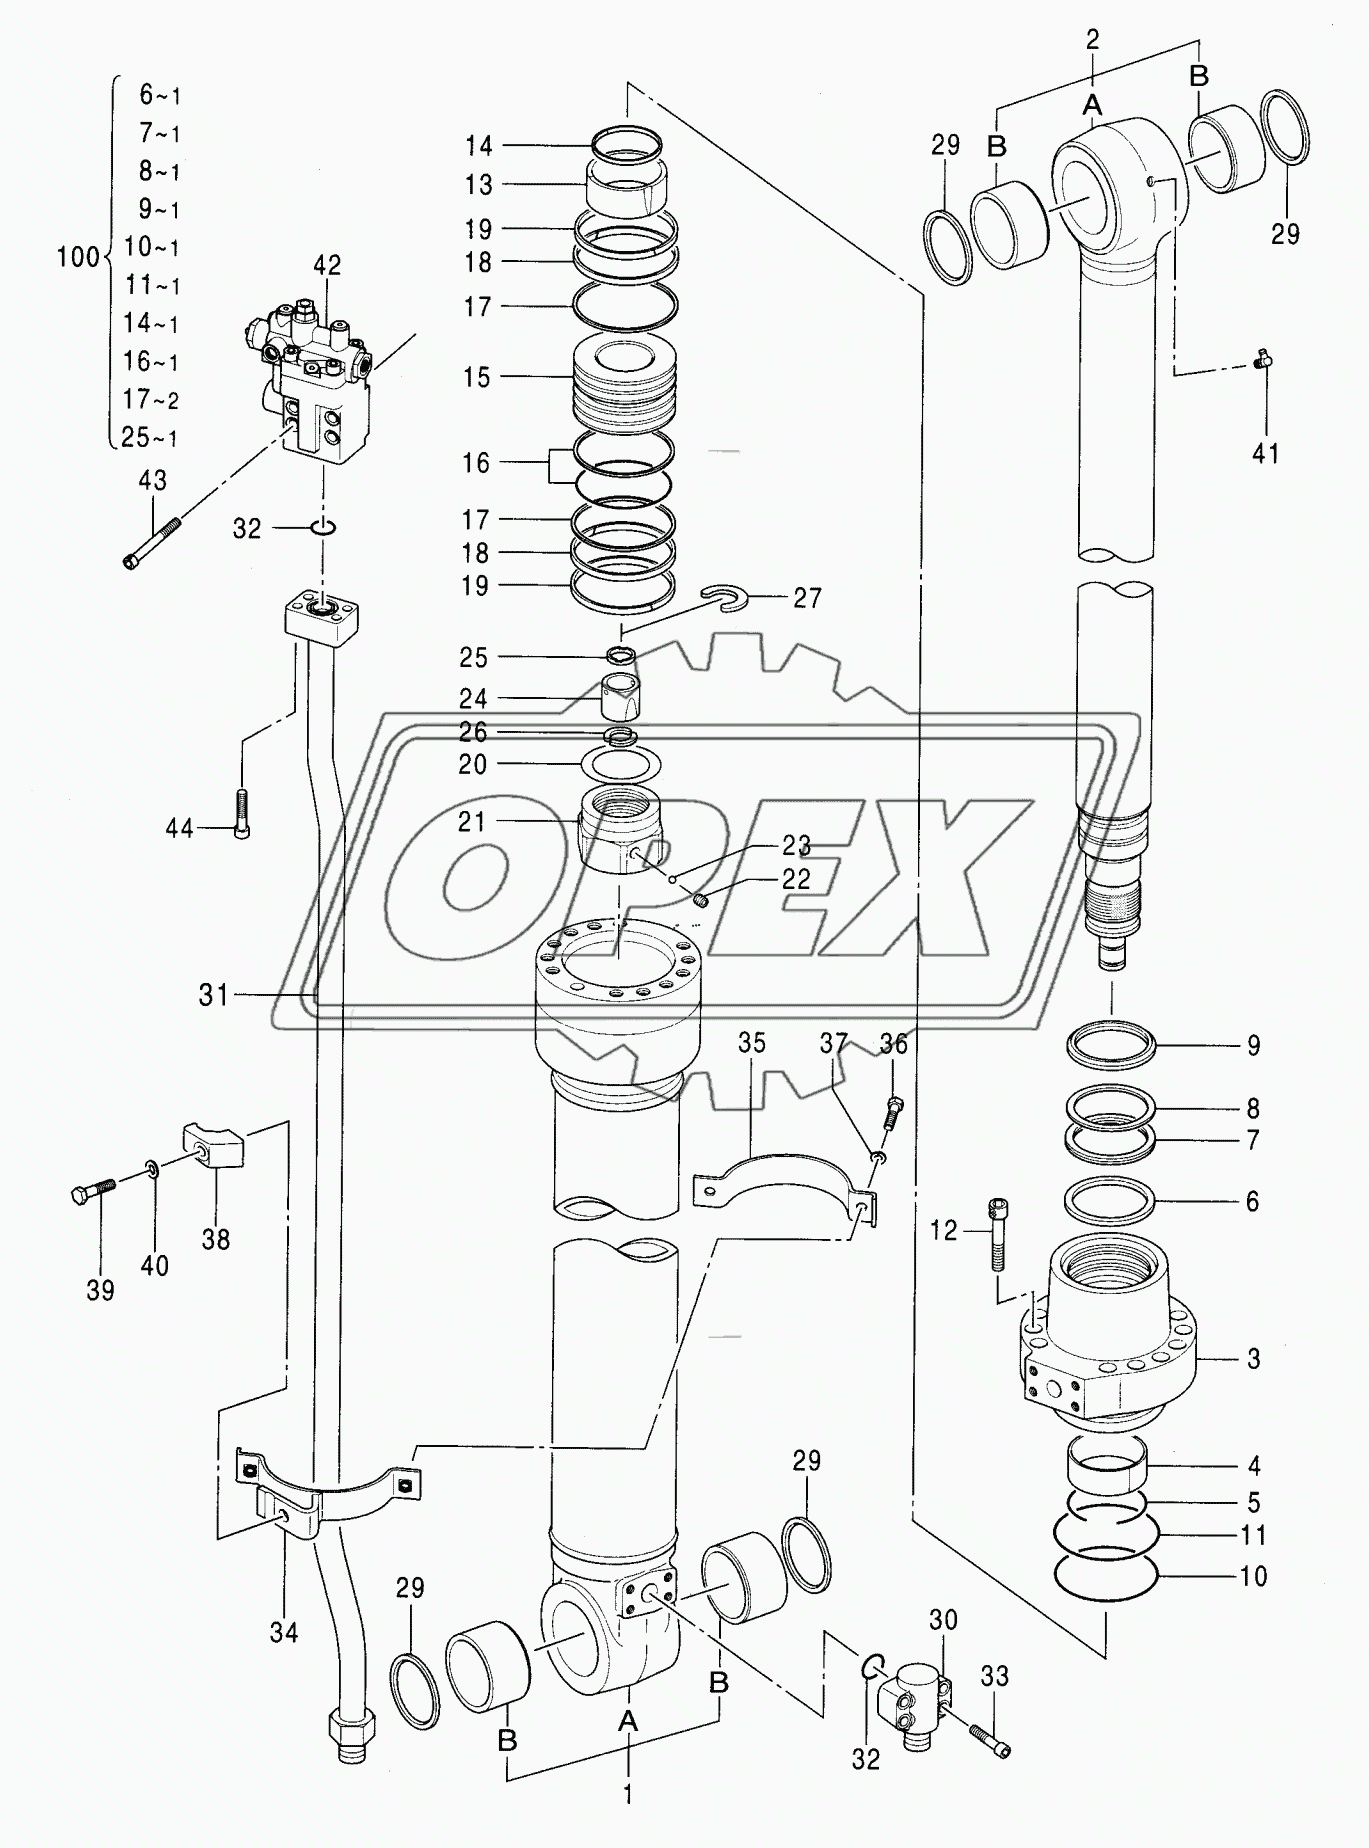 CYL., ARM (WITH HOLDING VALVE) (MONO BOOM)